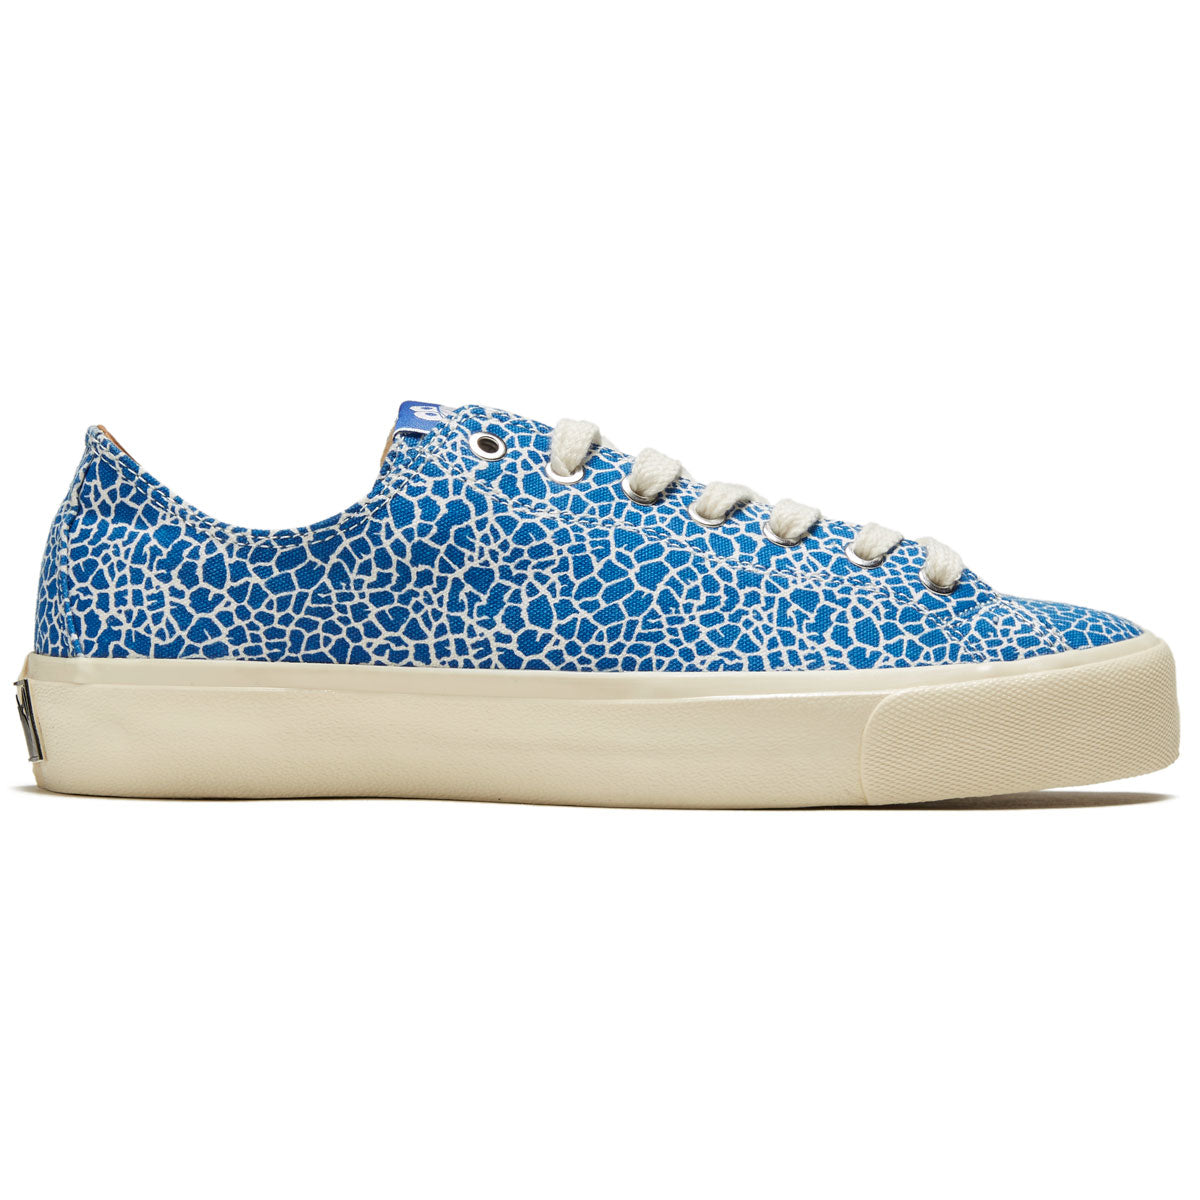 Last Resort AB VM003 Canvas Low Shoes - Cracked Blue/White/White image 1